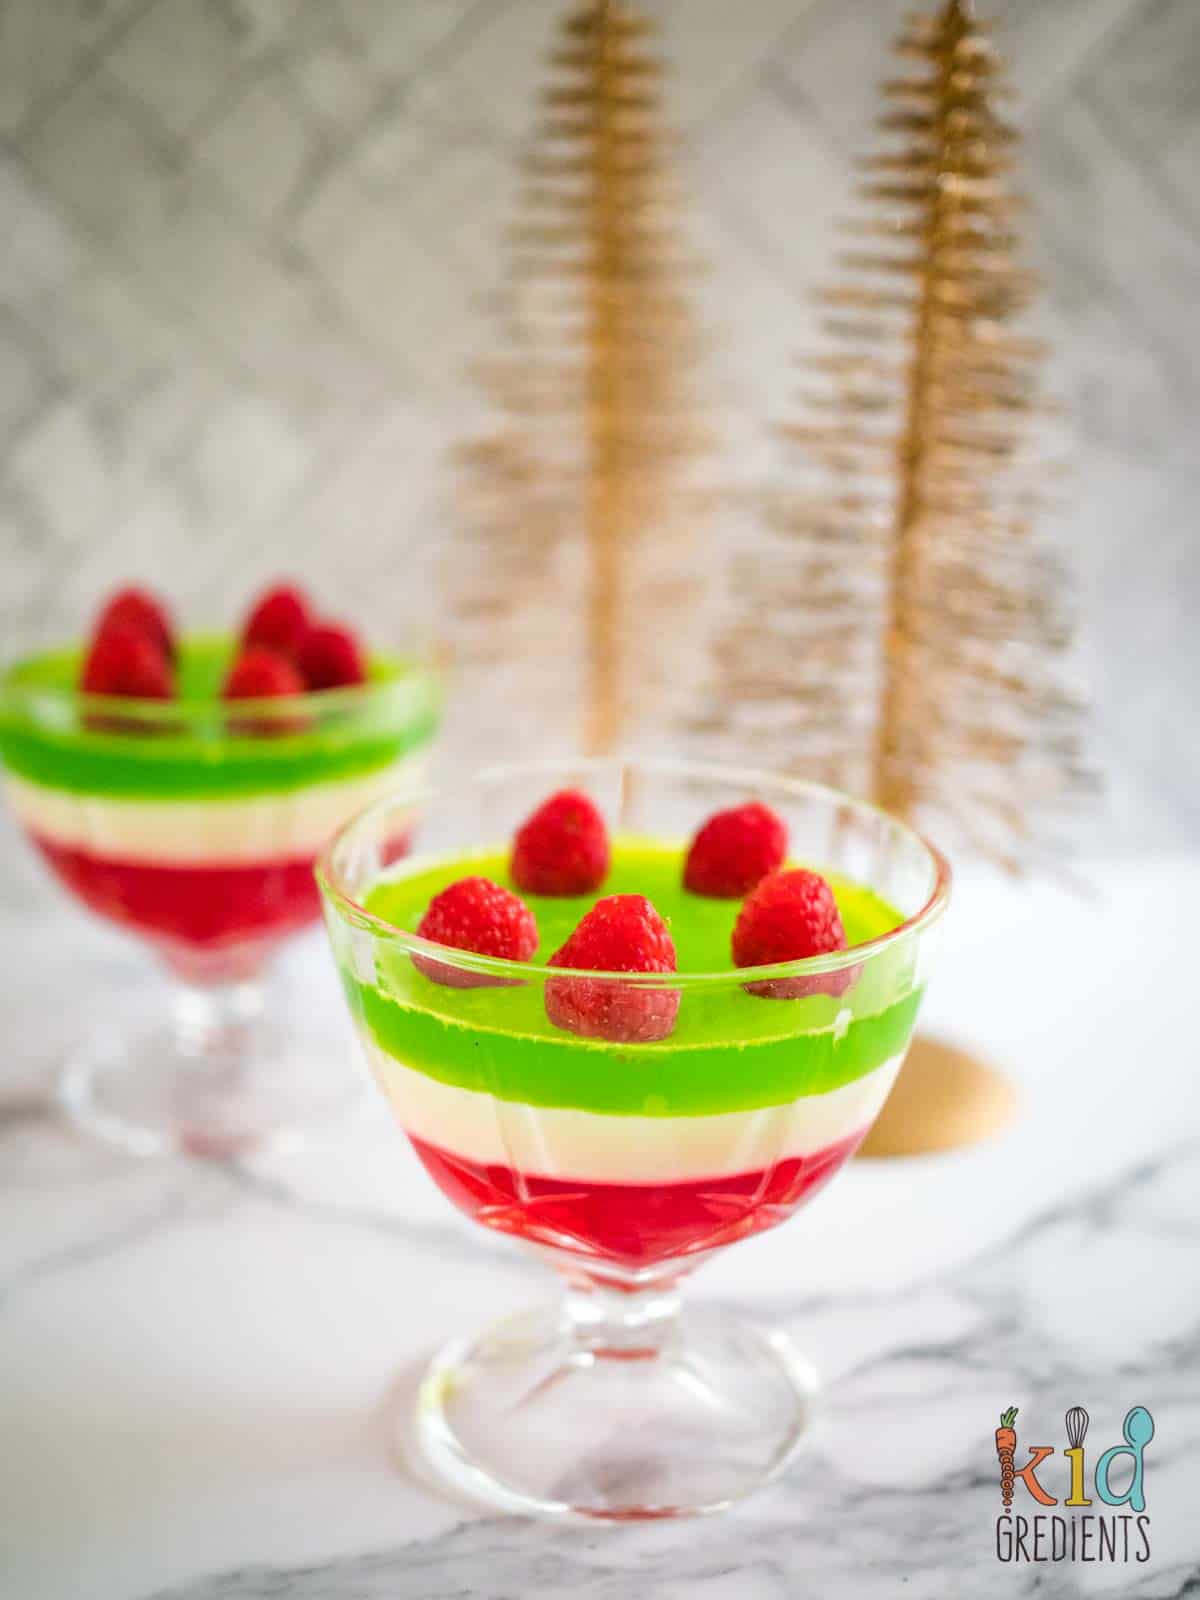 Layered jelly in glasses with raspberries on top